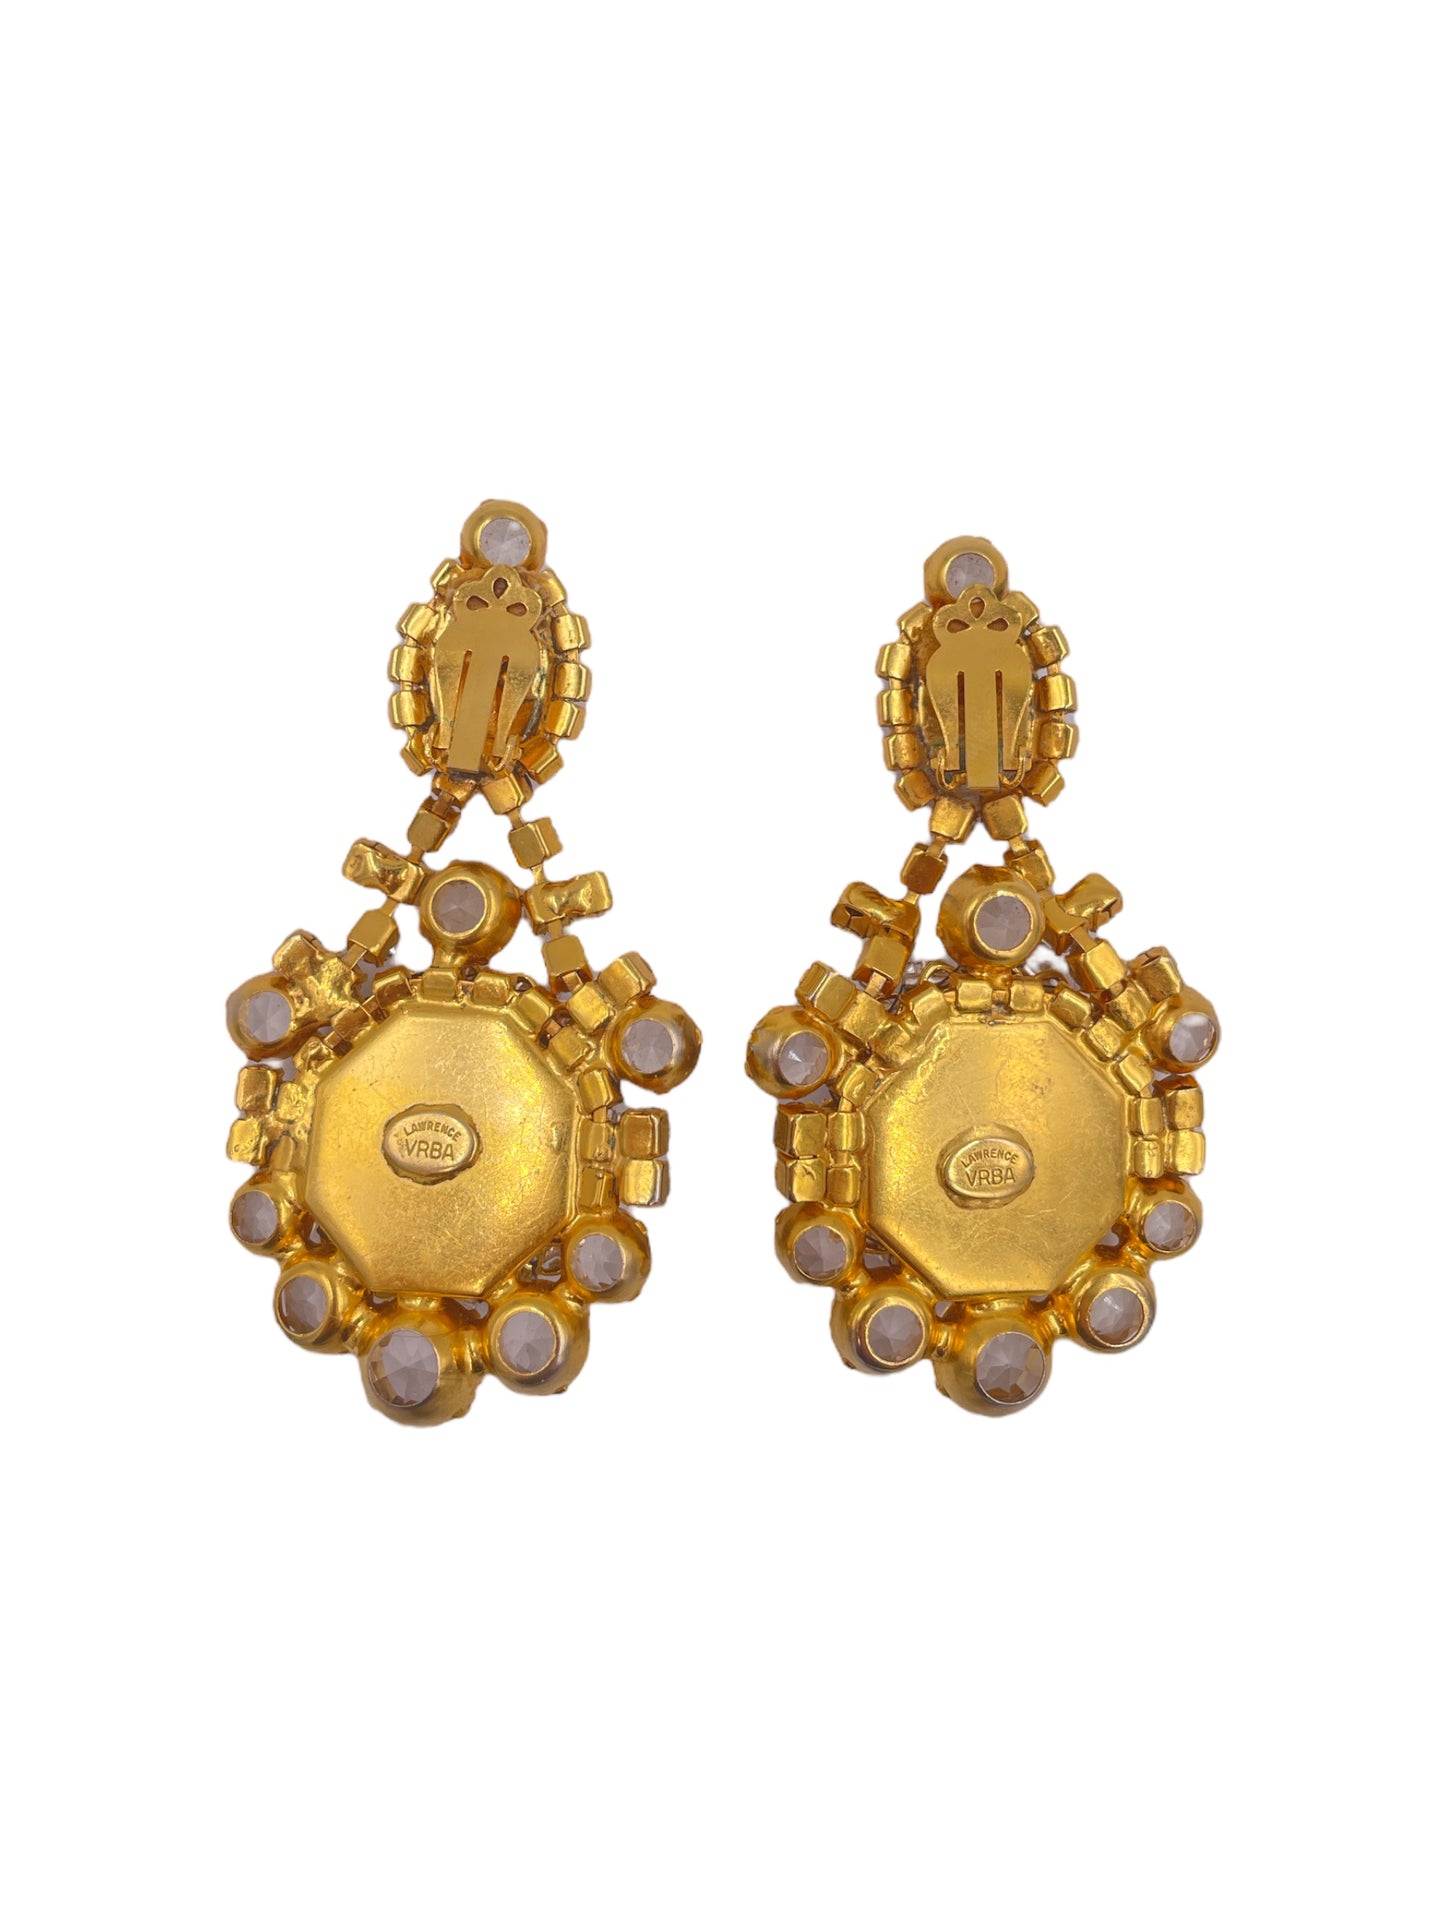 Lawrence Vrba Gold Large Crystal Earring